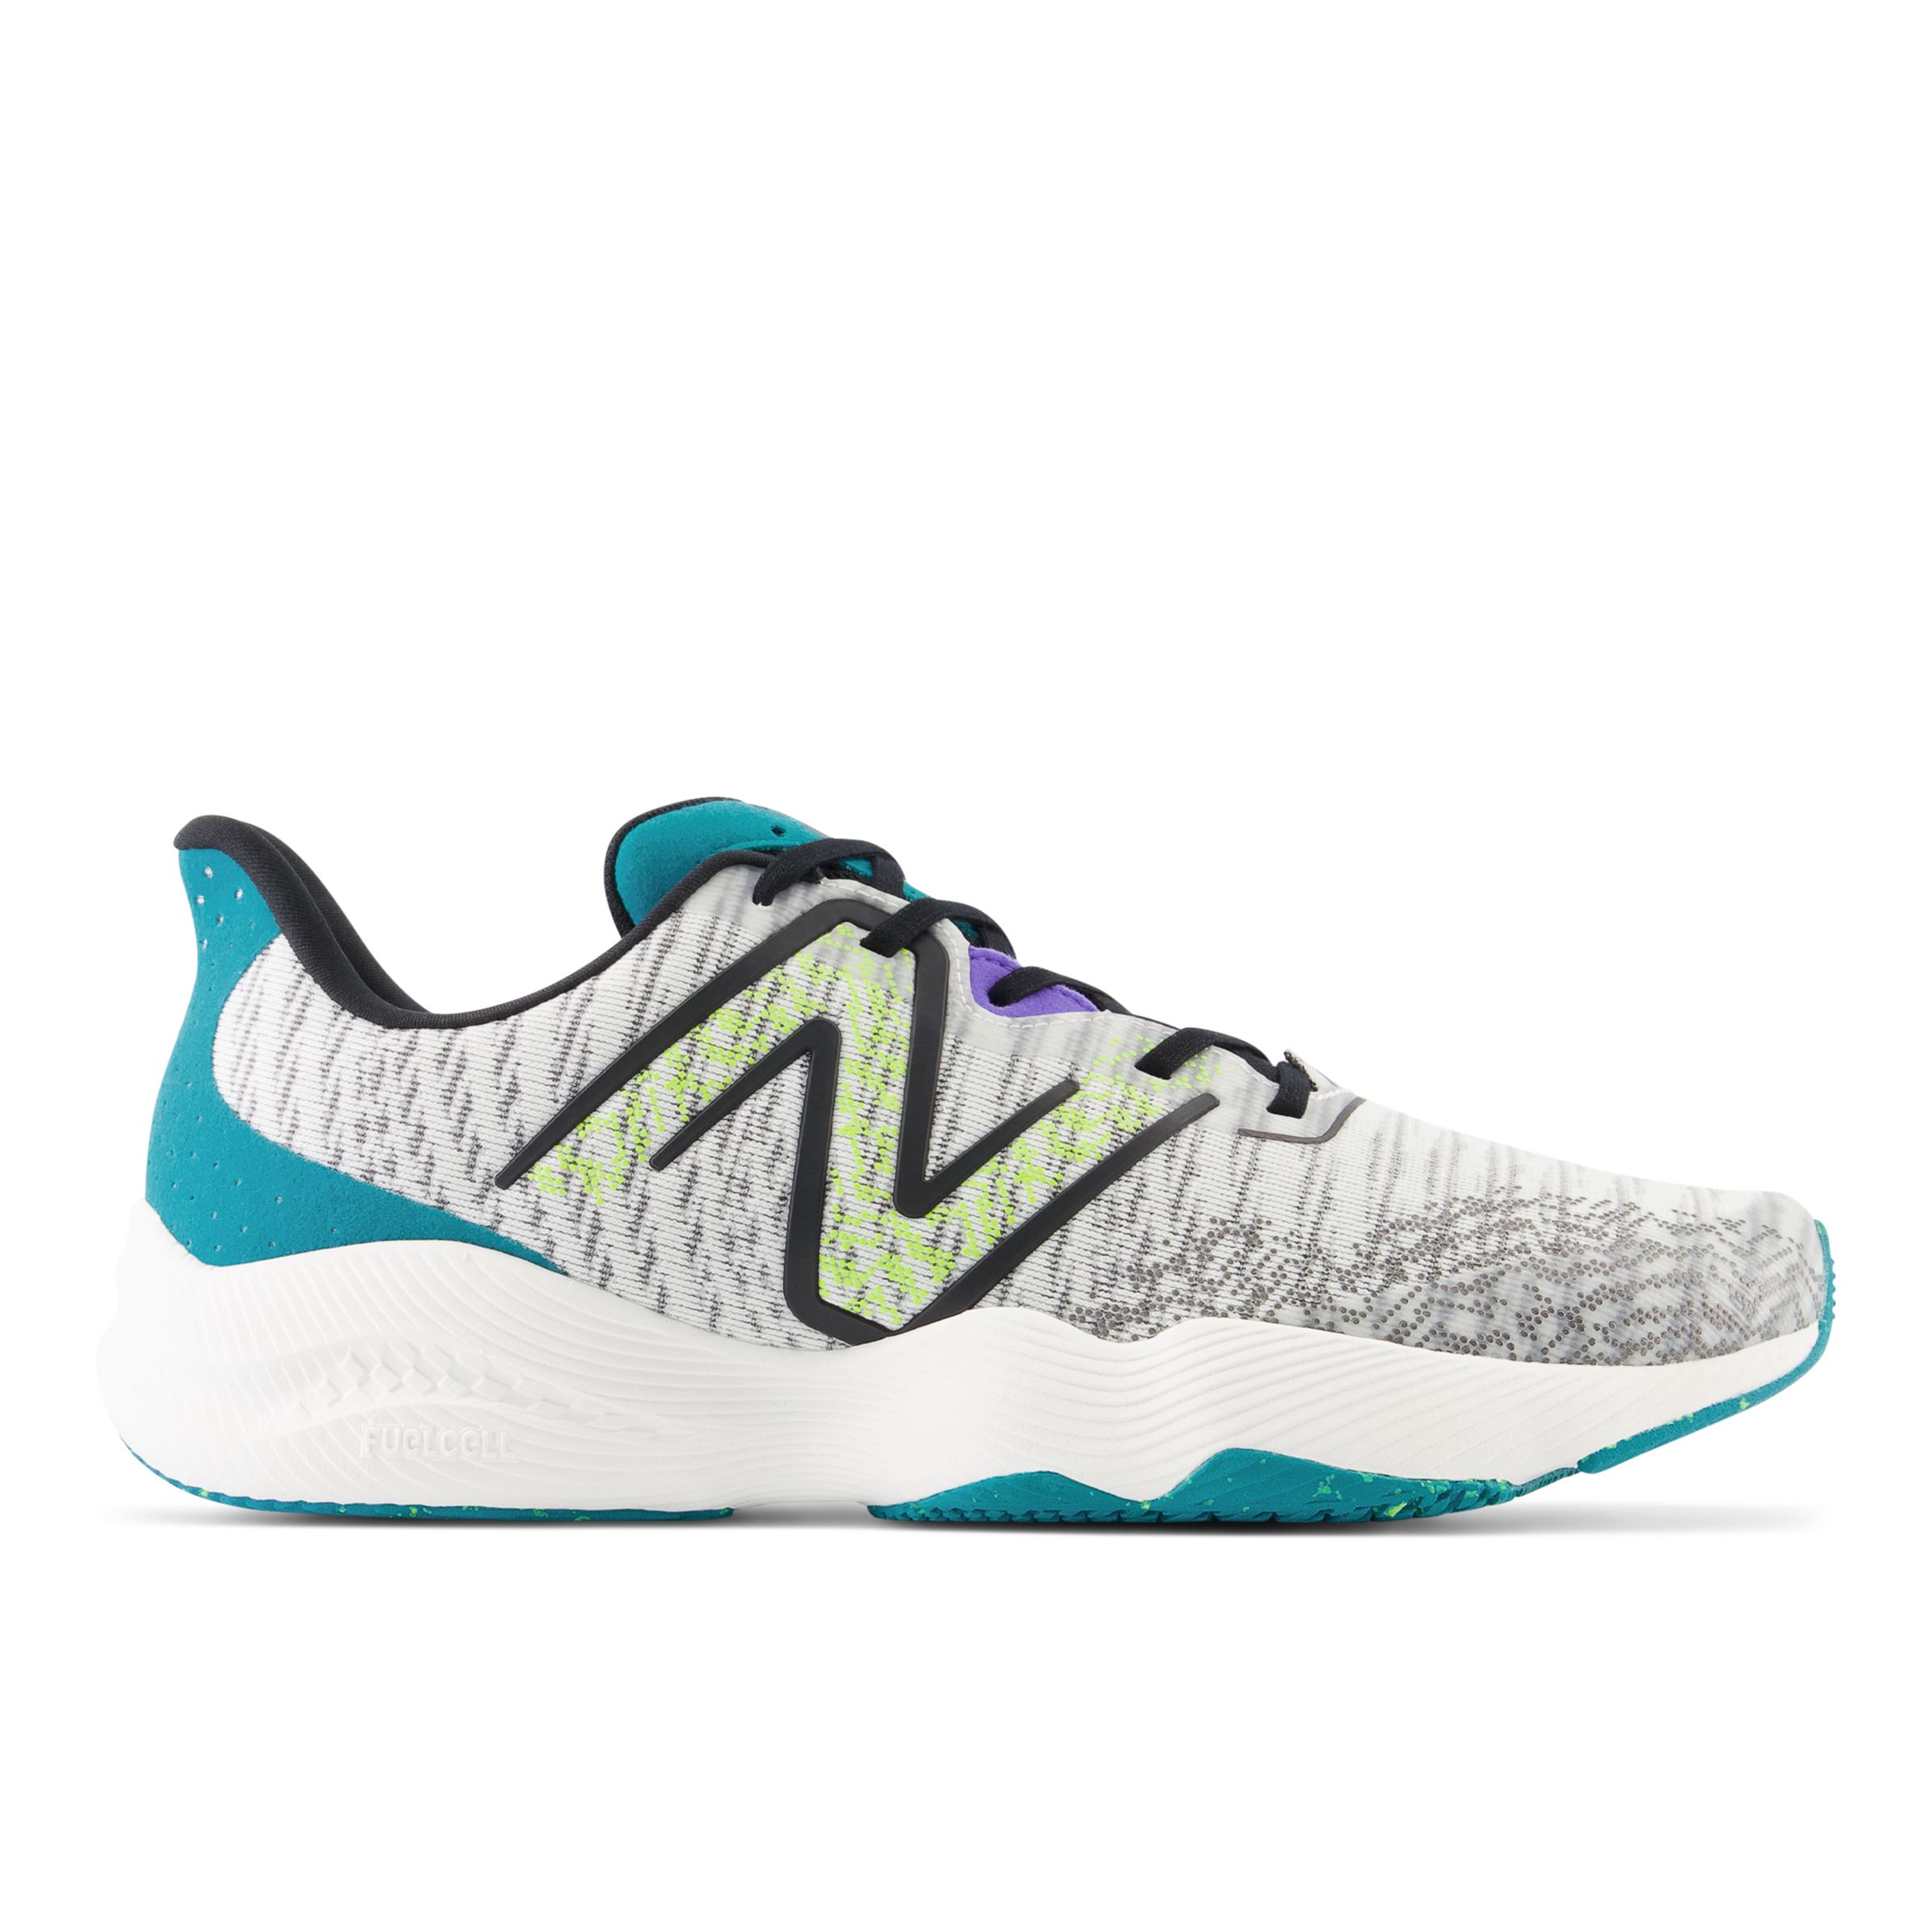 Men's FuelCell Shift TR v2 Shoes - New Balance